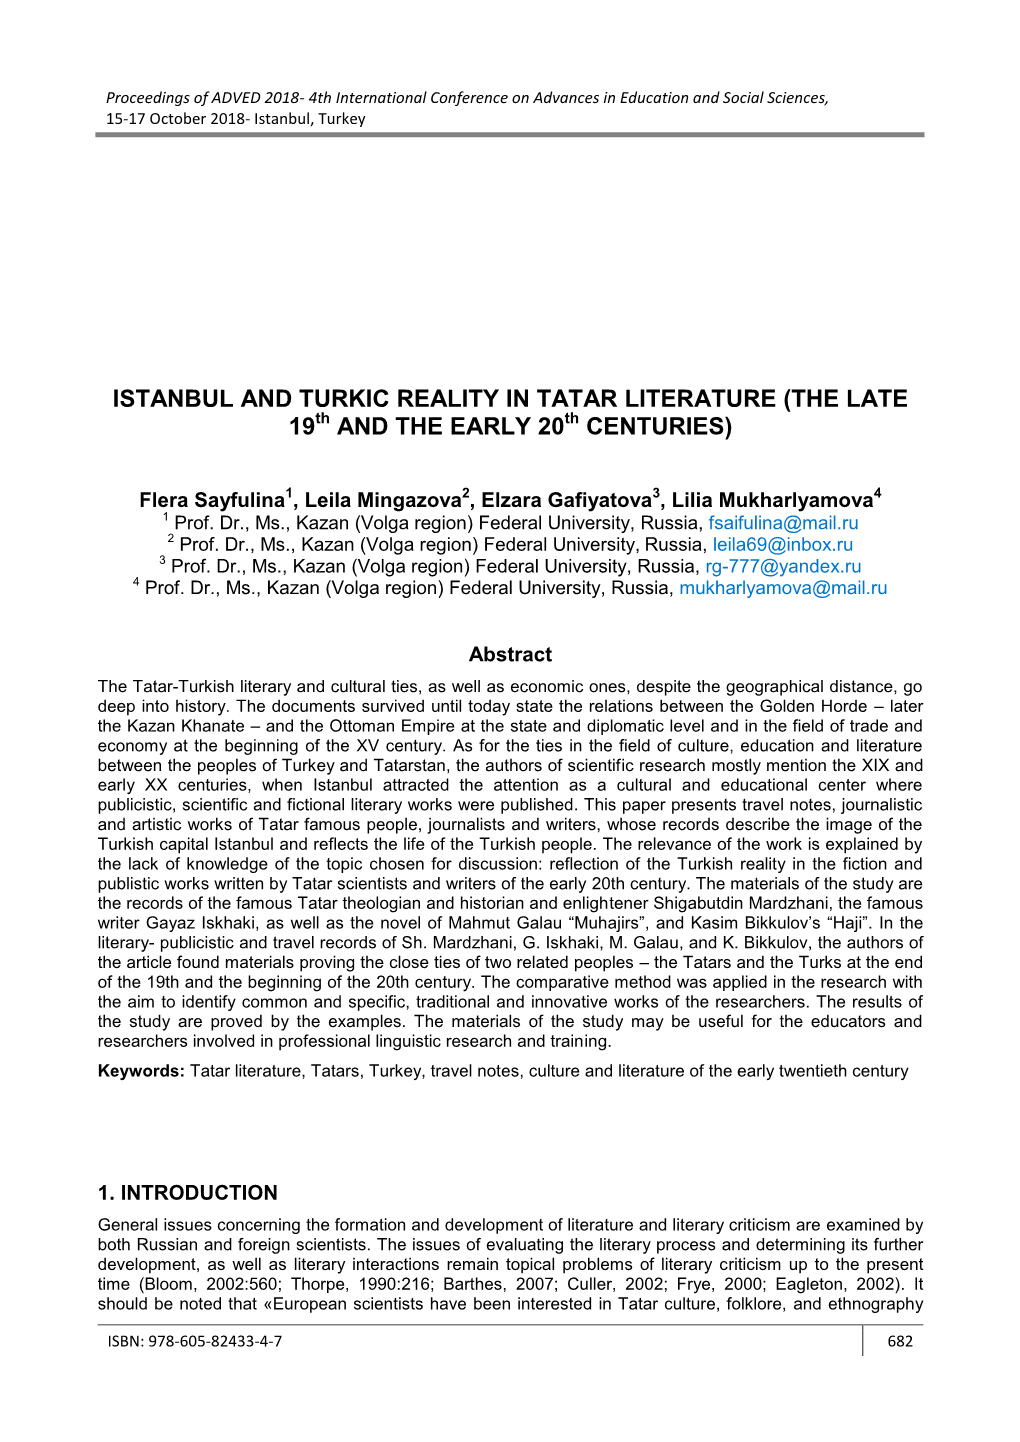 ISTANBUL and TURKIC REALITY in TATAR LITERATURE (THE LATE 19Th and the EARLY 20Th CENTURIES)